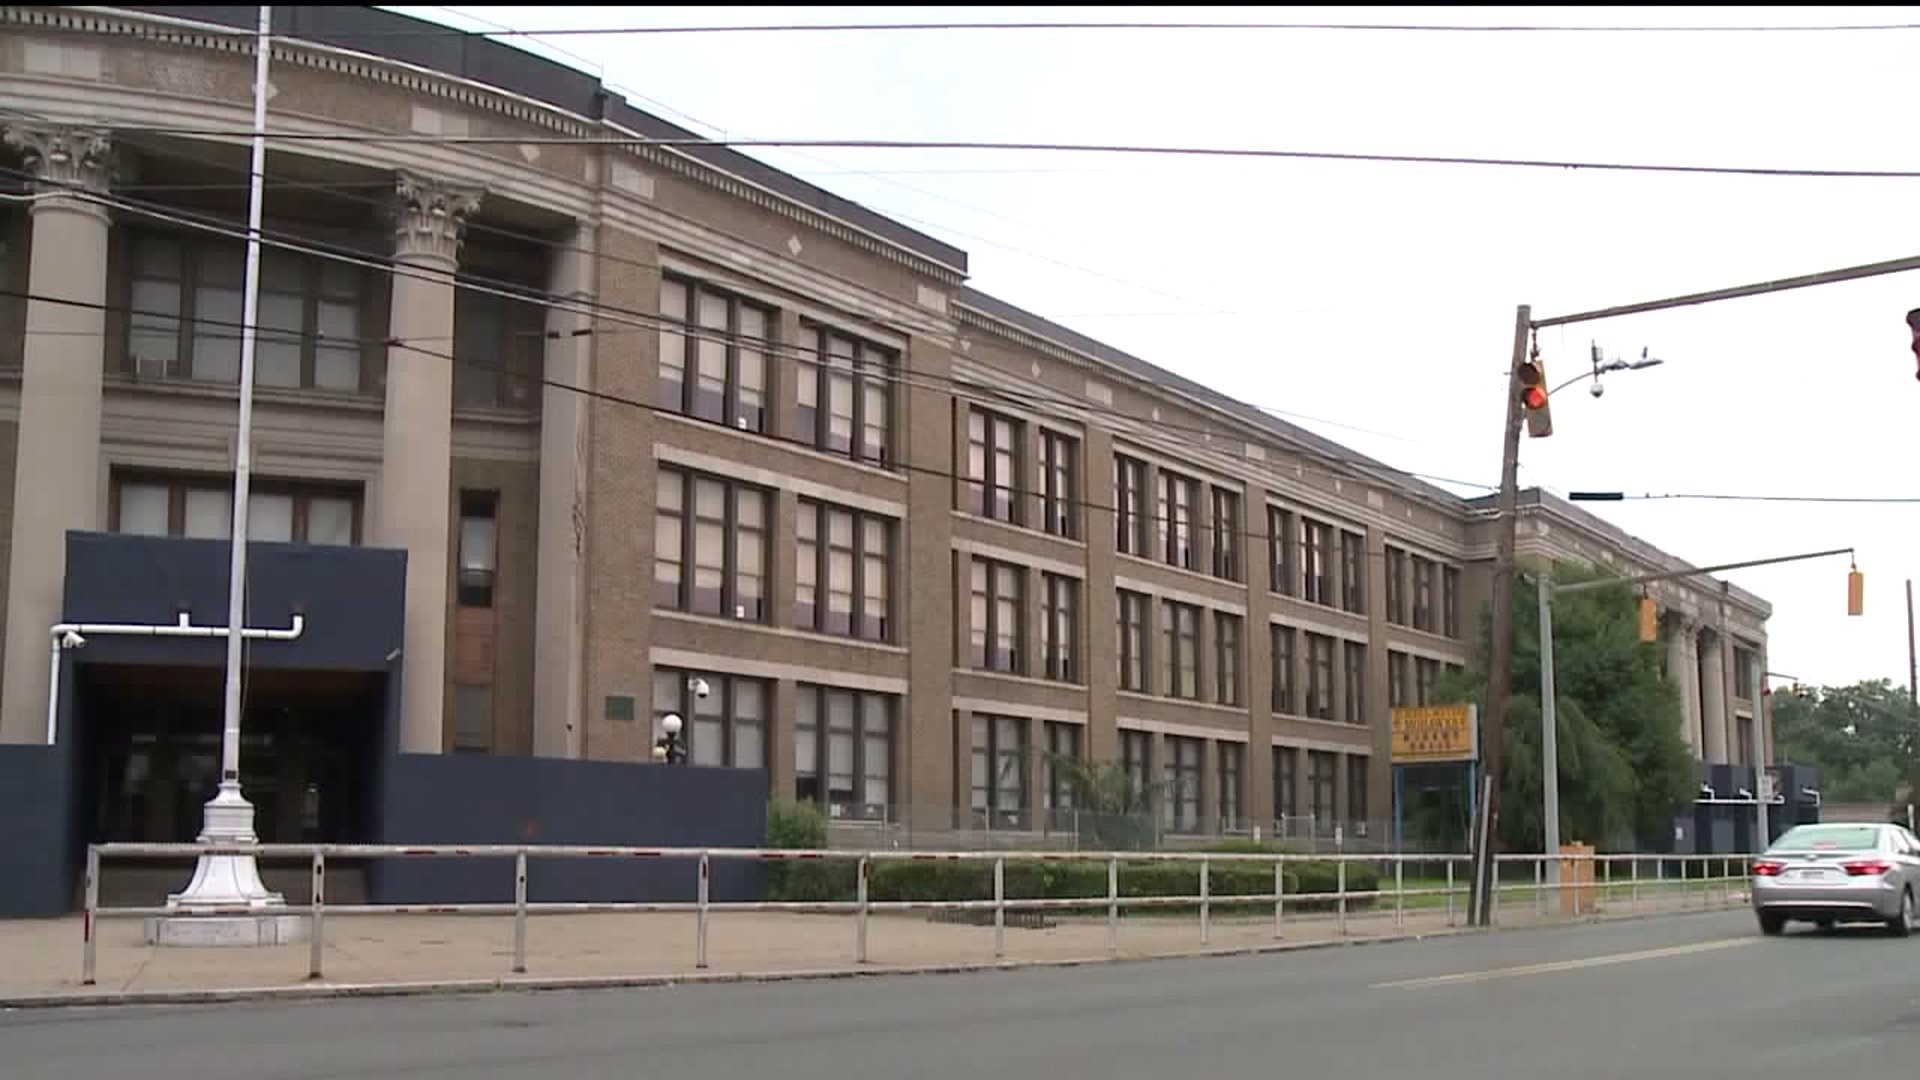 Protest Against Wilkes-Barre Area Schools Consolidation Planned